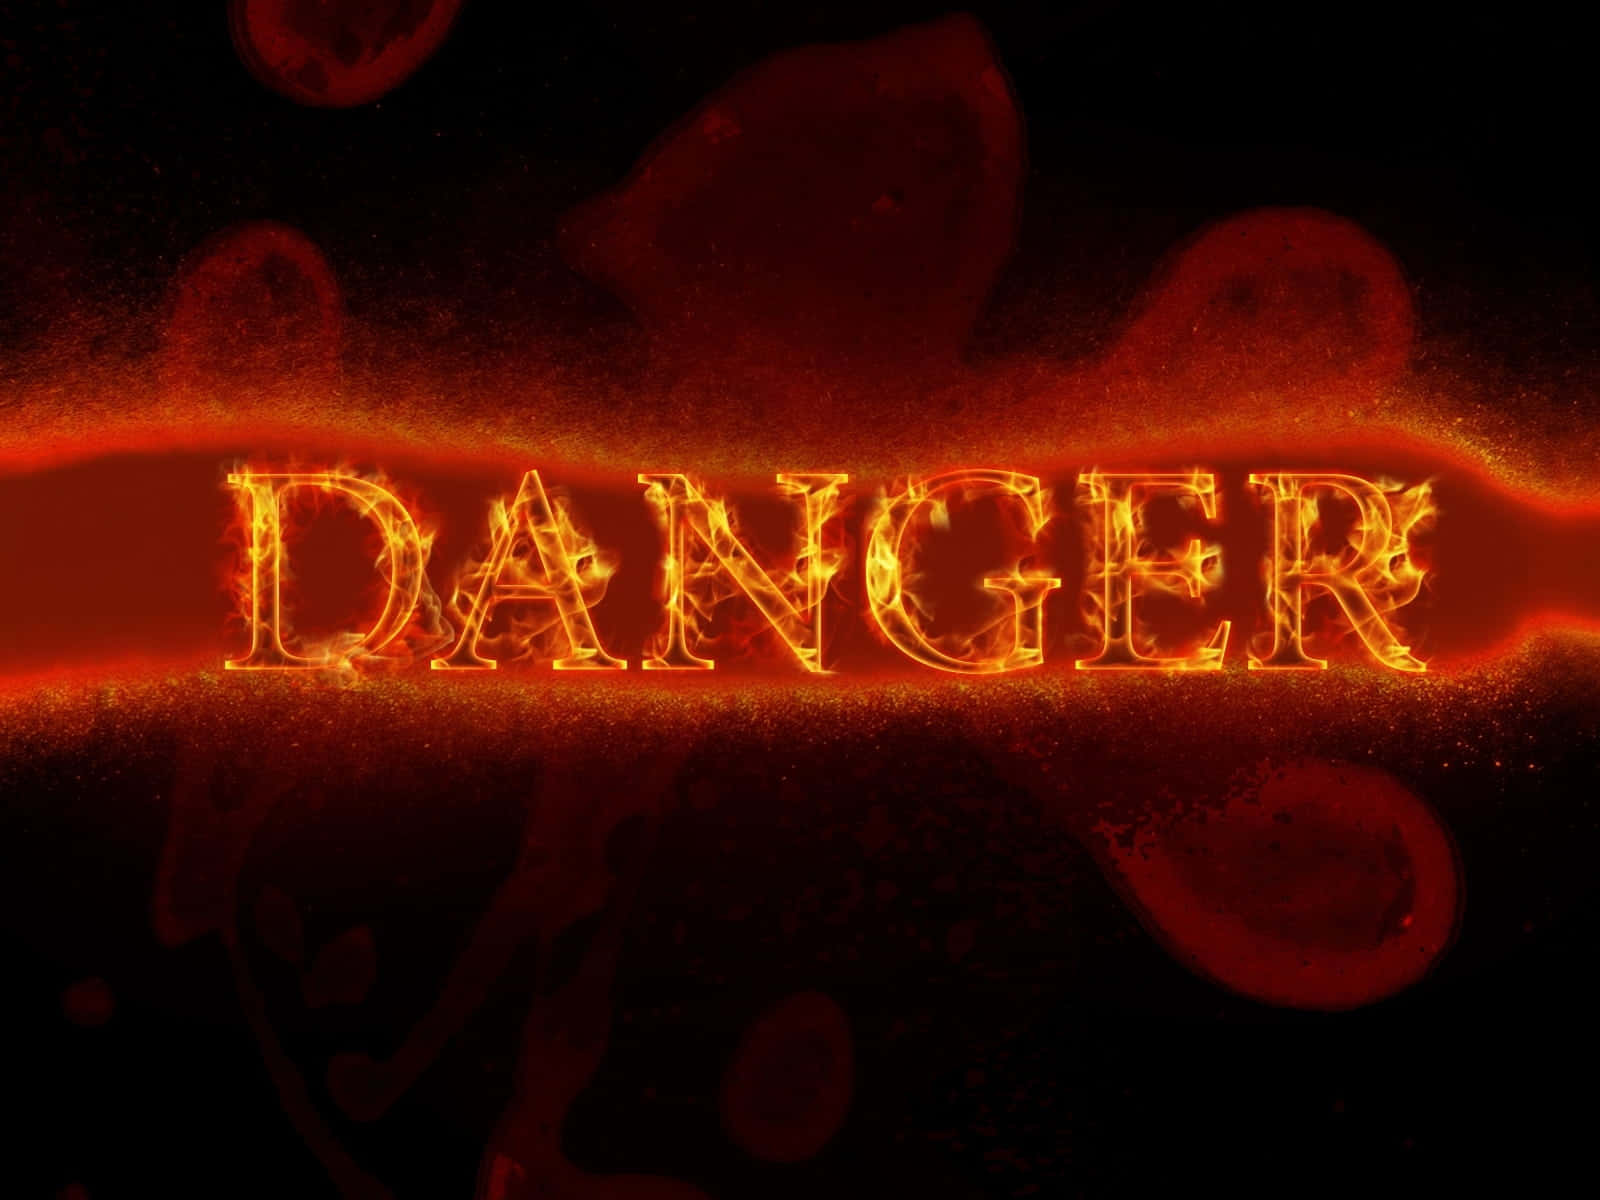 Danger Text Effect - Stock Video Footage